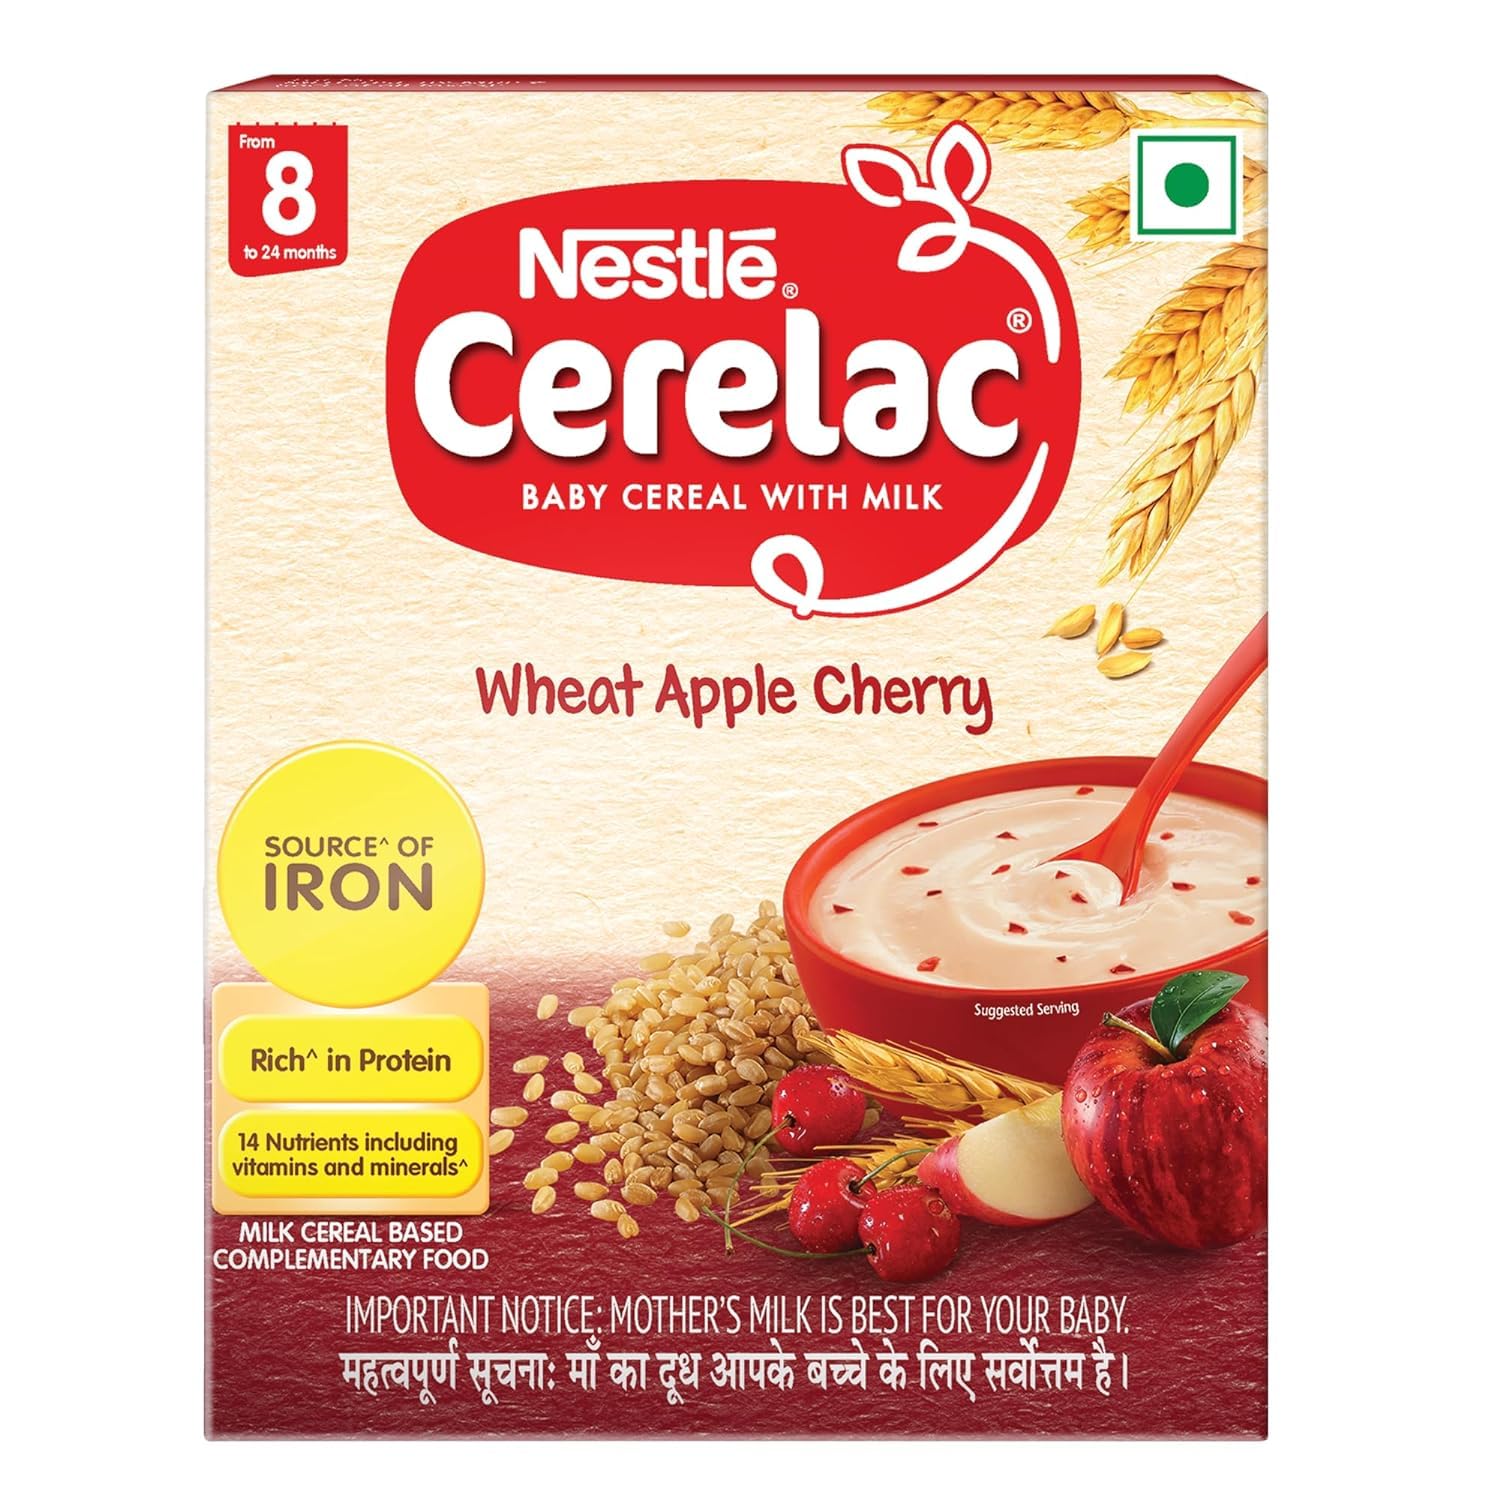 Nestle Cerelac Baby Cereal with Milk from 8 to 24 Months | Rich in Iron | Wheat Apple Cherry